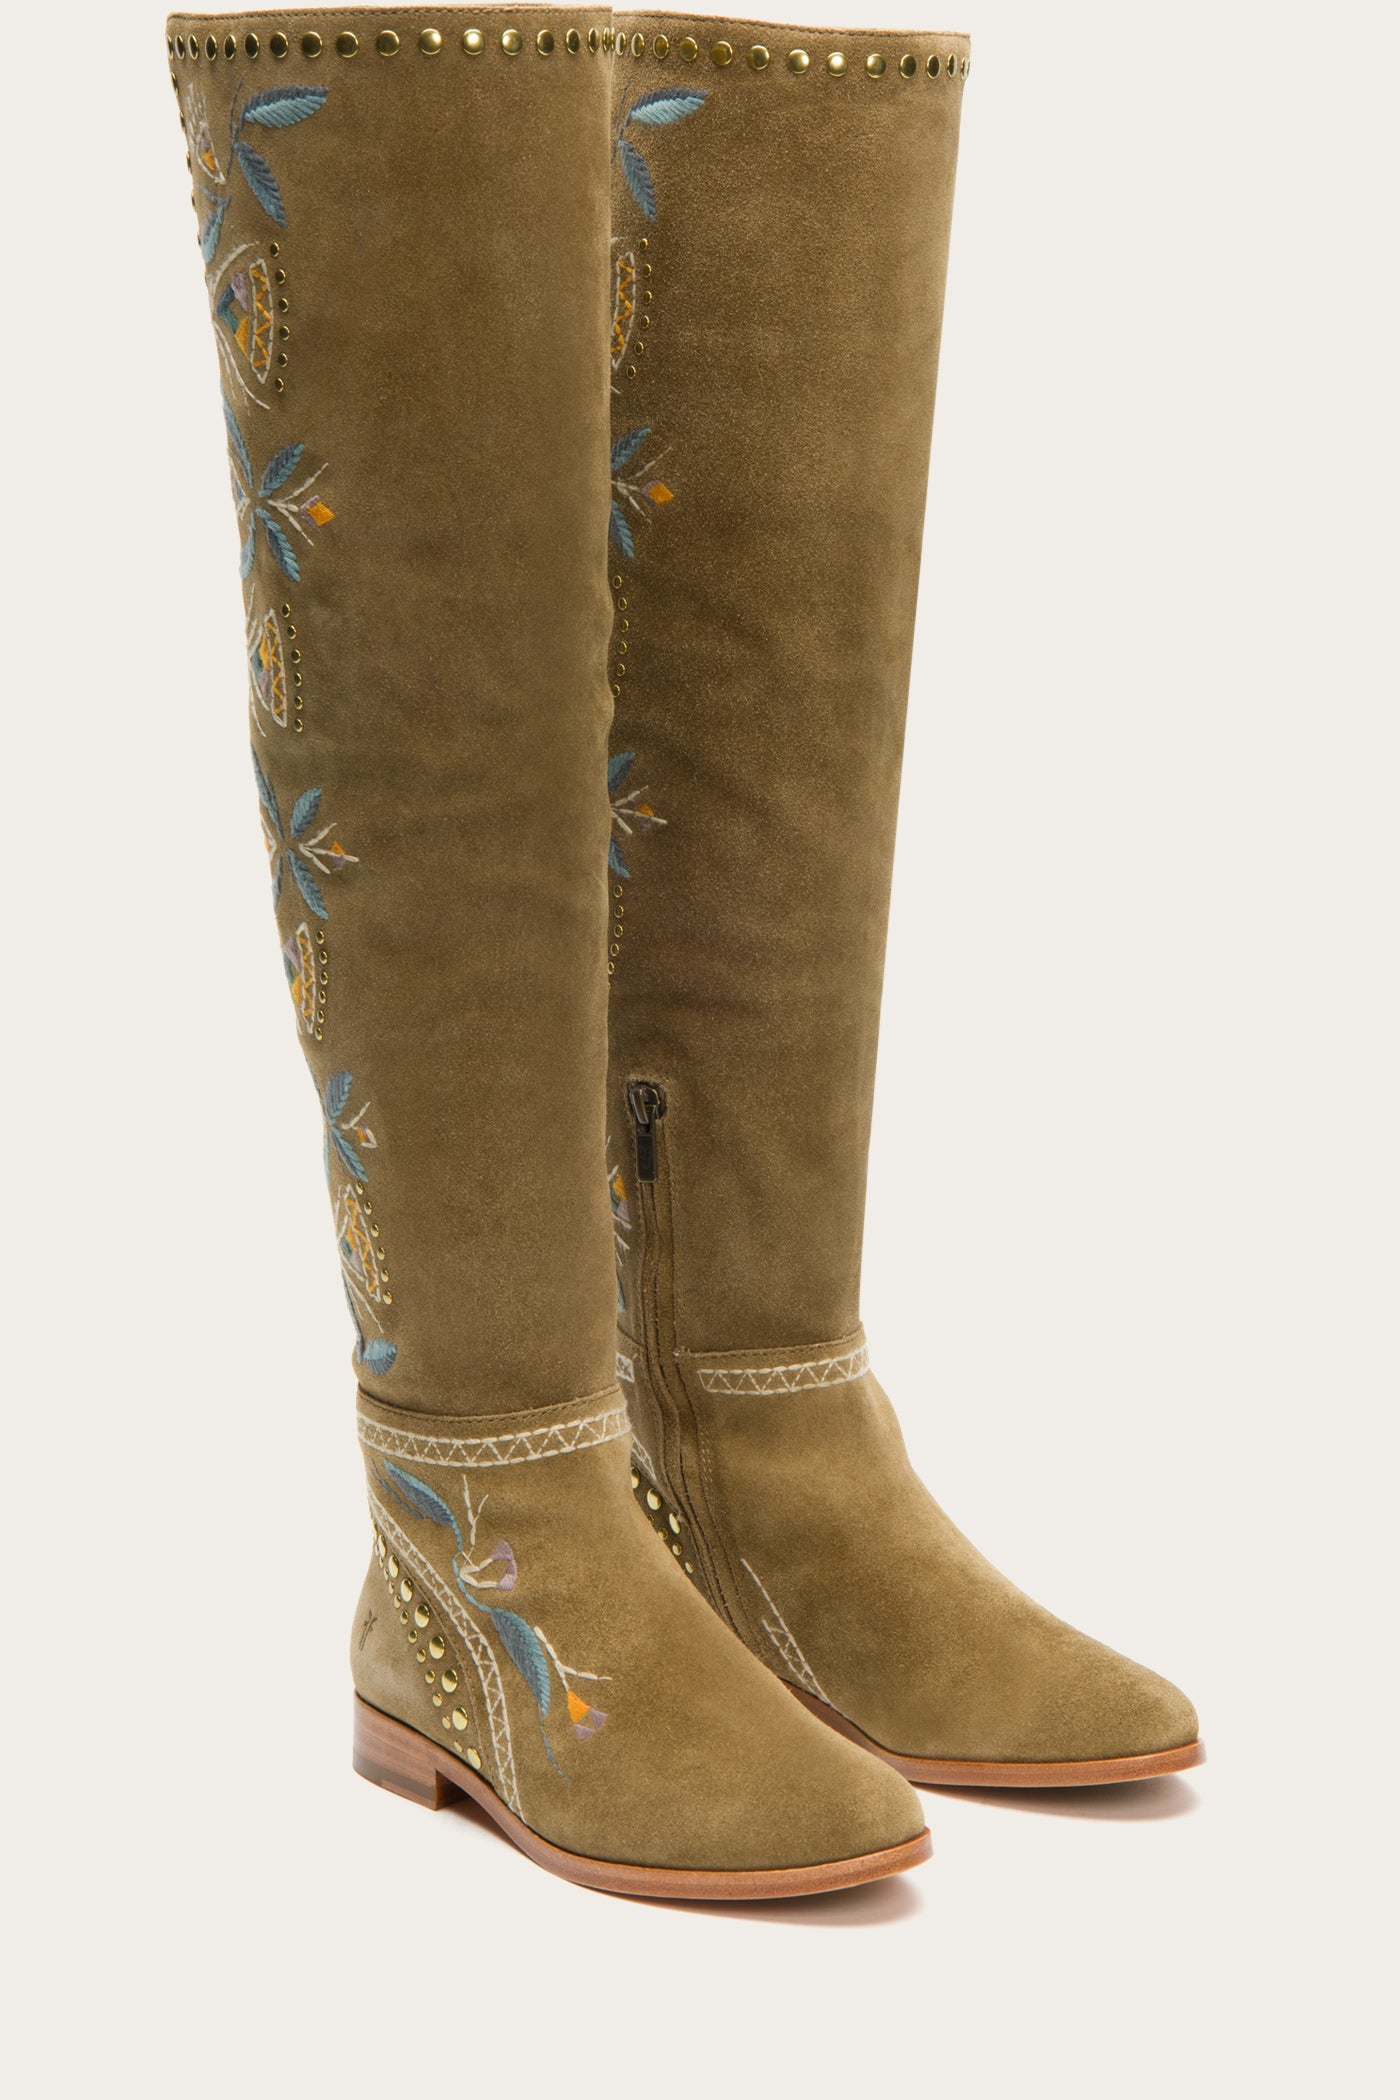 frye embroidered boots